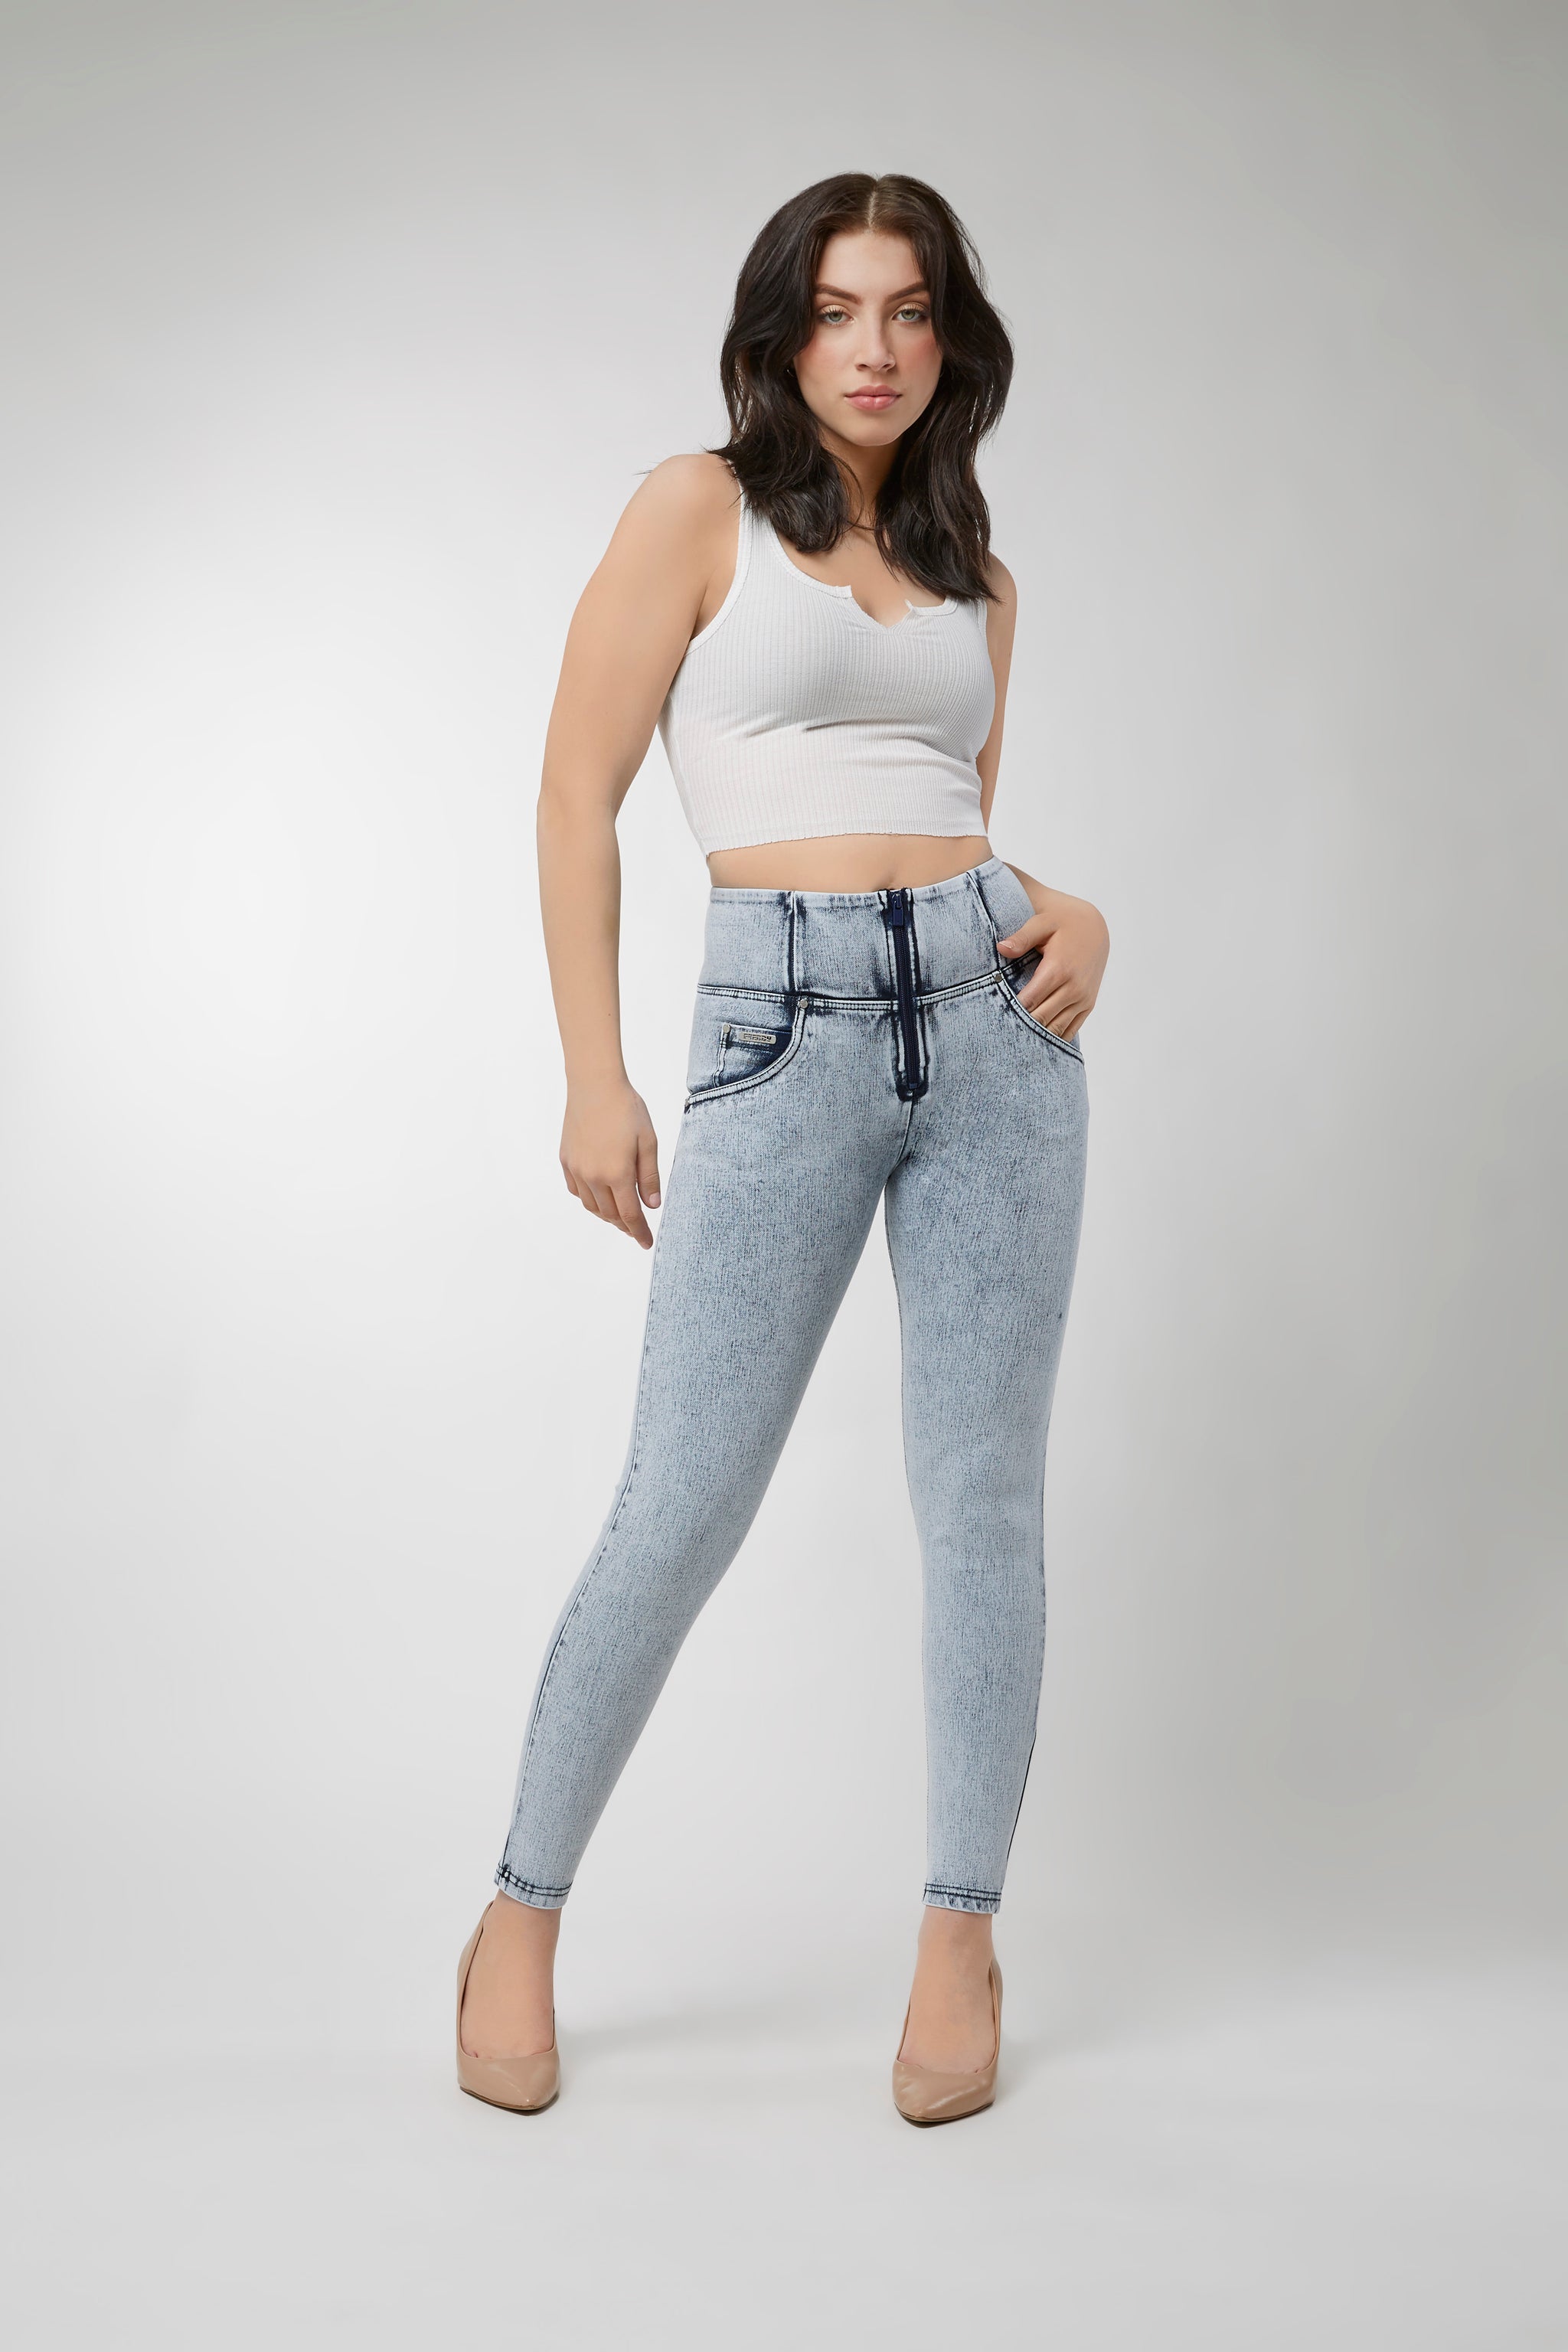 High Rise Jeans - Buy High Rise Jeans Online Starting at Just